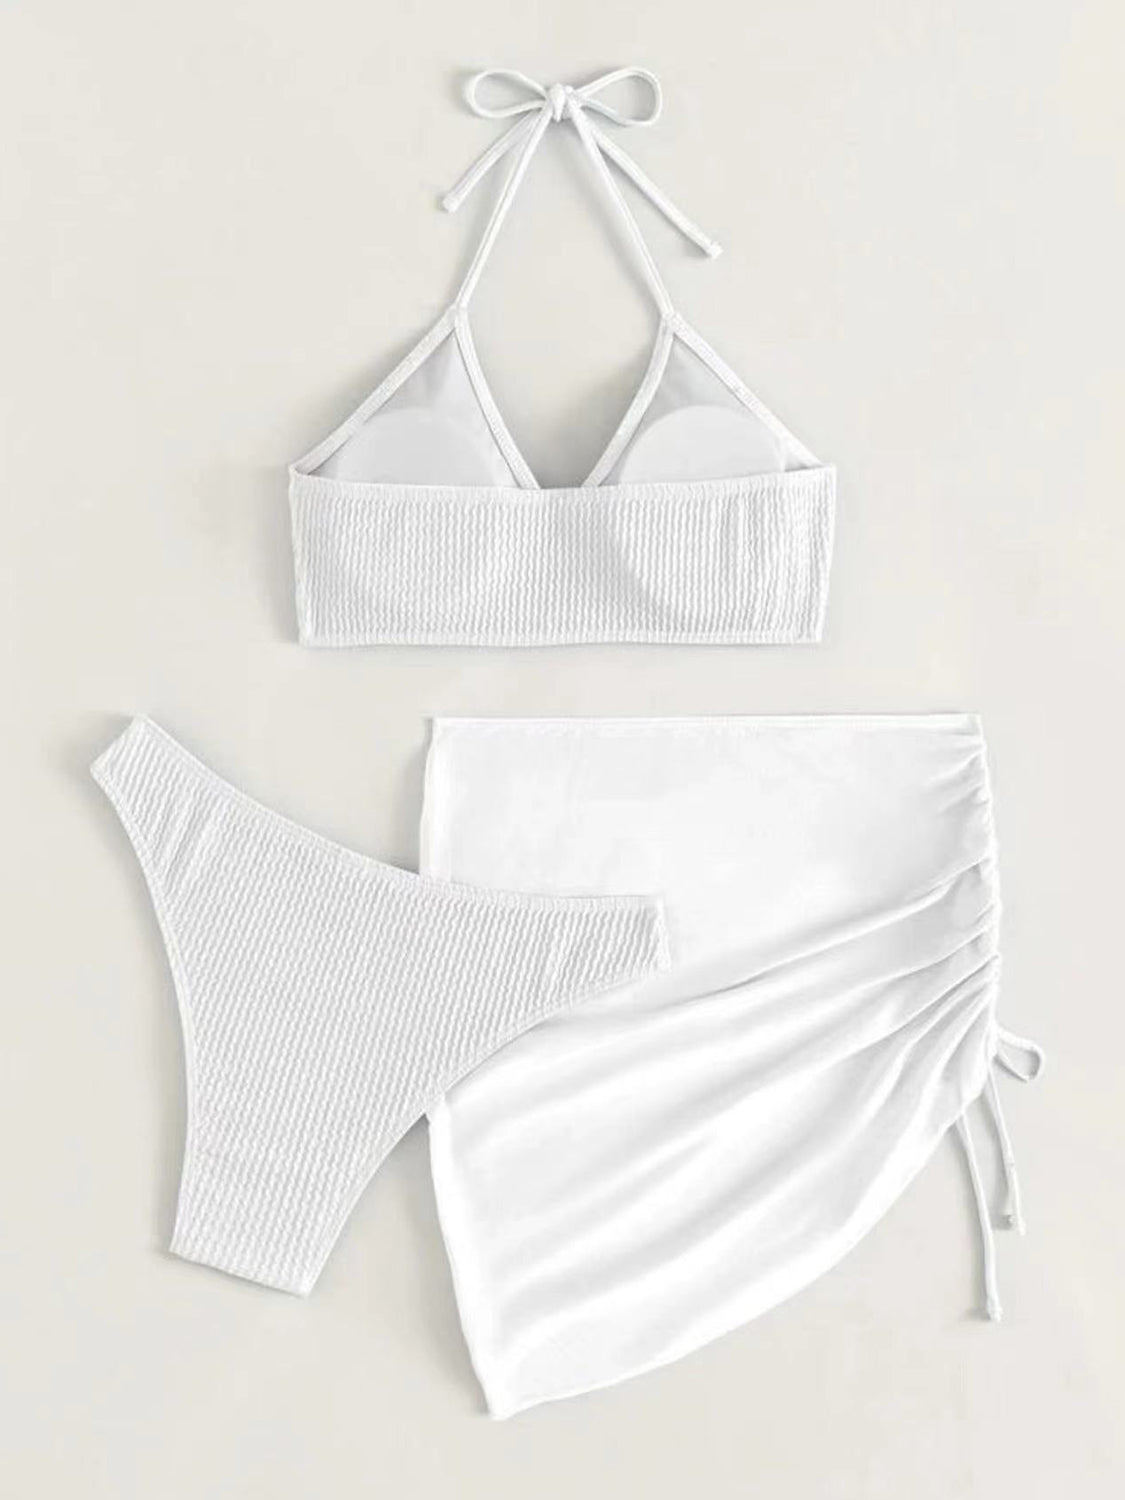 Check out our chic white bathing suit. Adjustable, stylish, and perfect for any beach day or poolside escape.